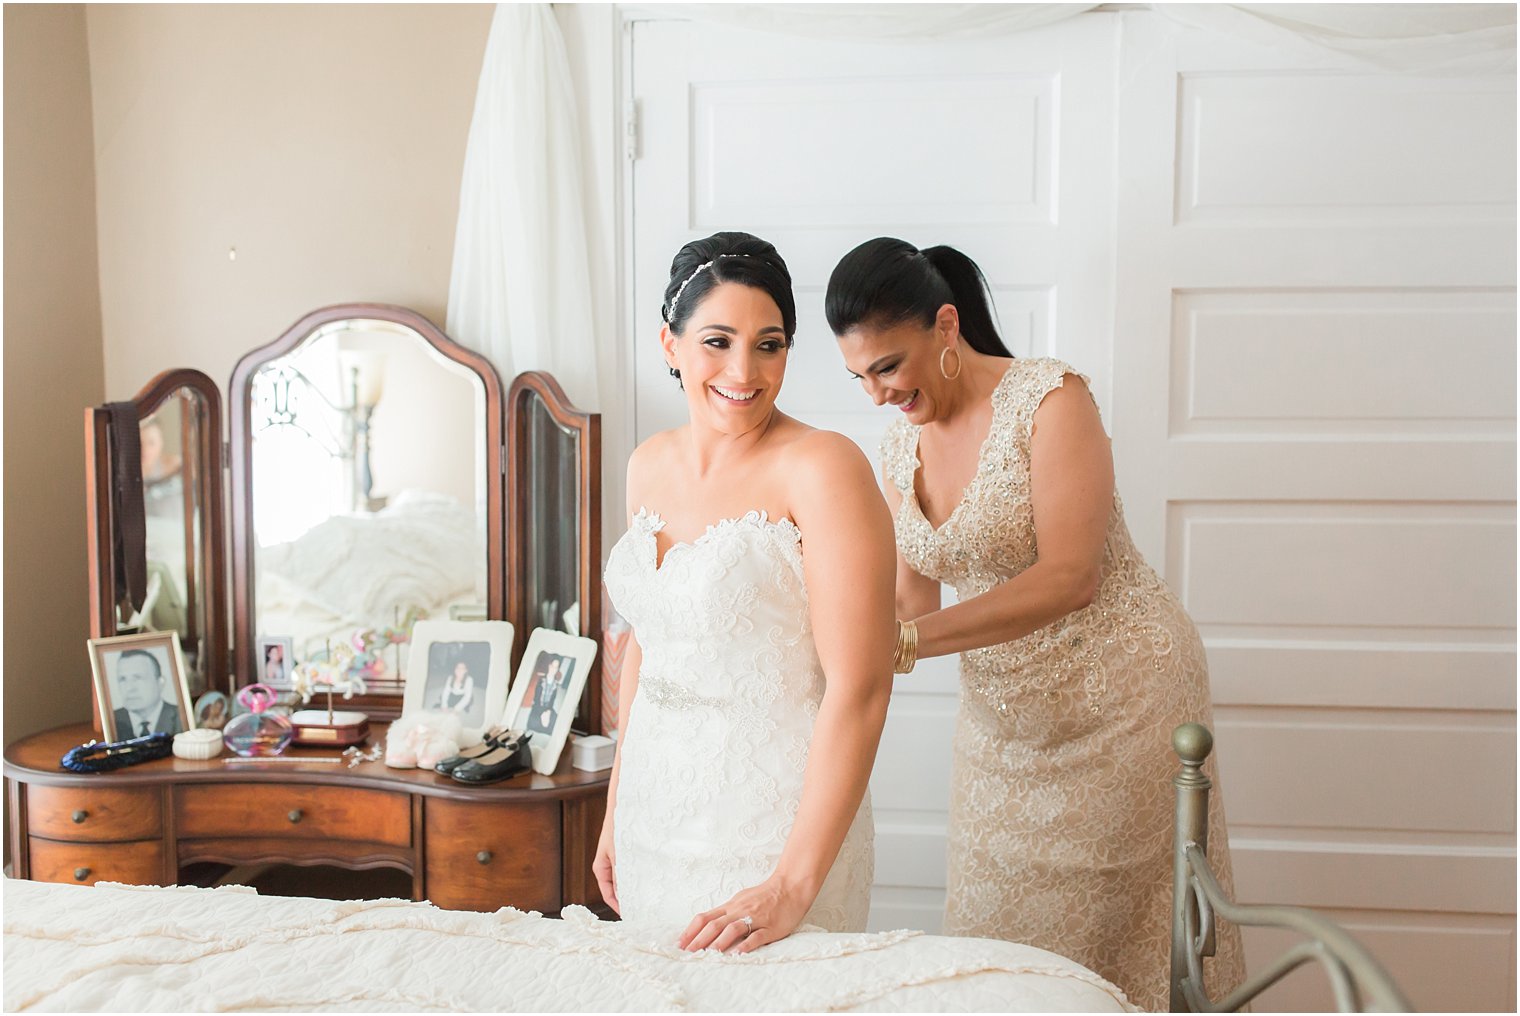 Mom helping bride into her dress